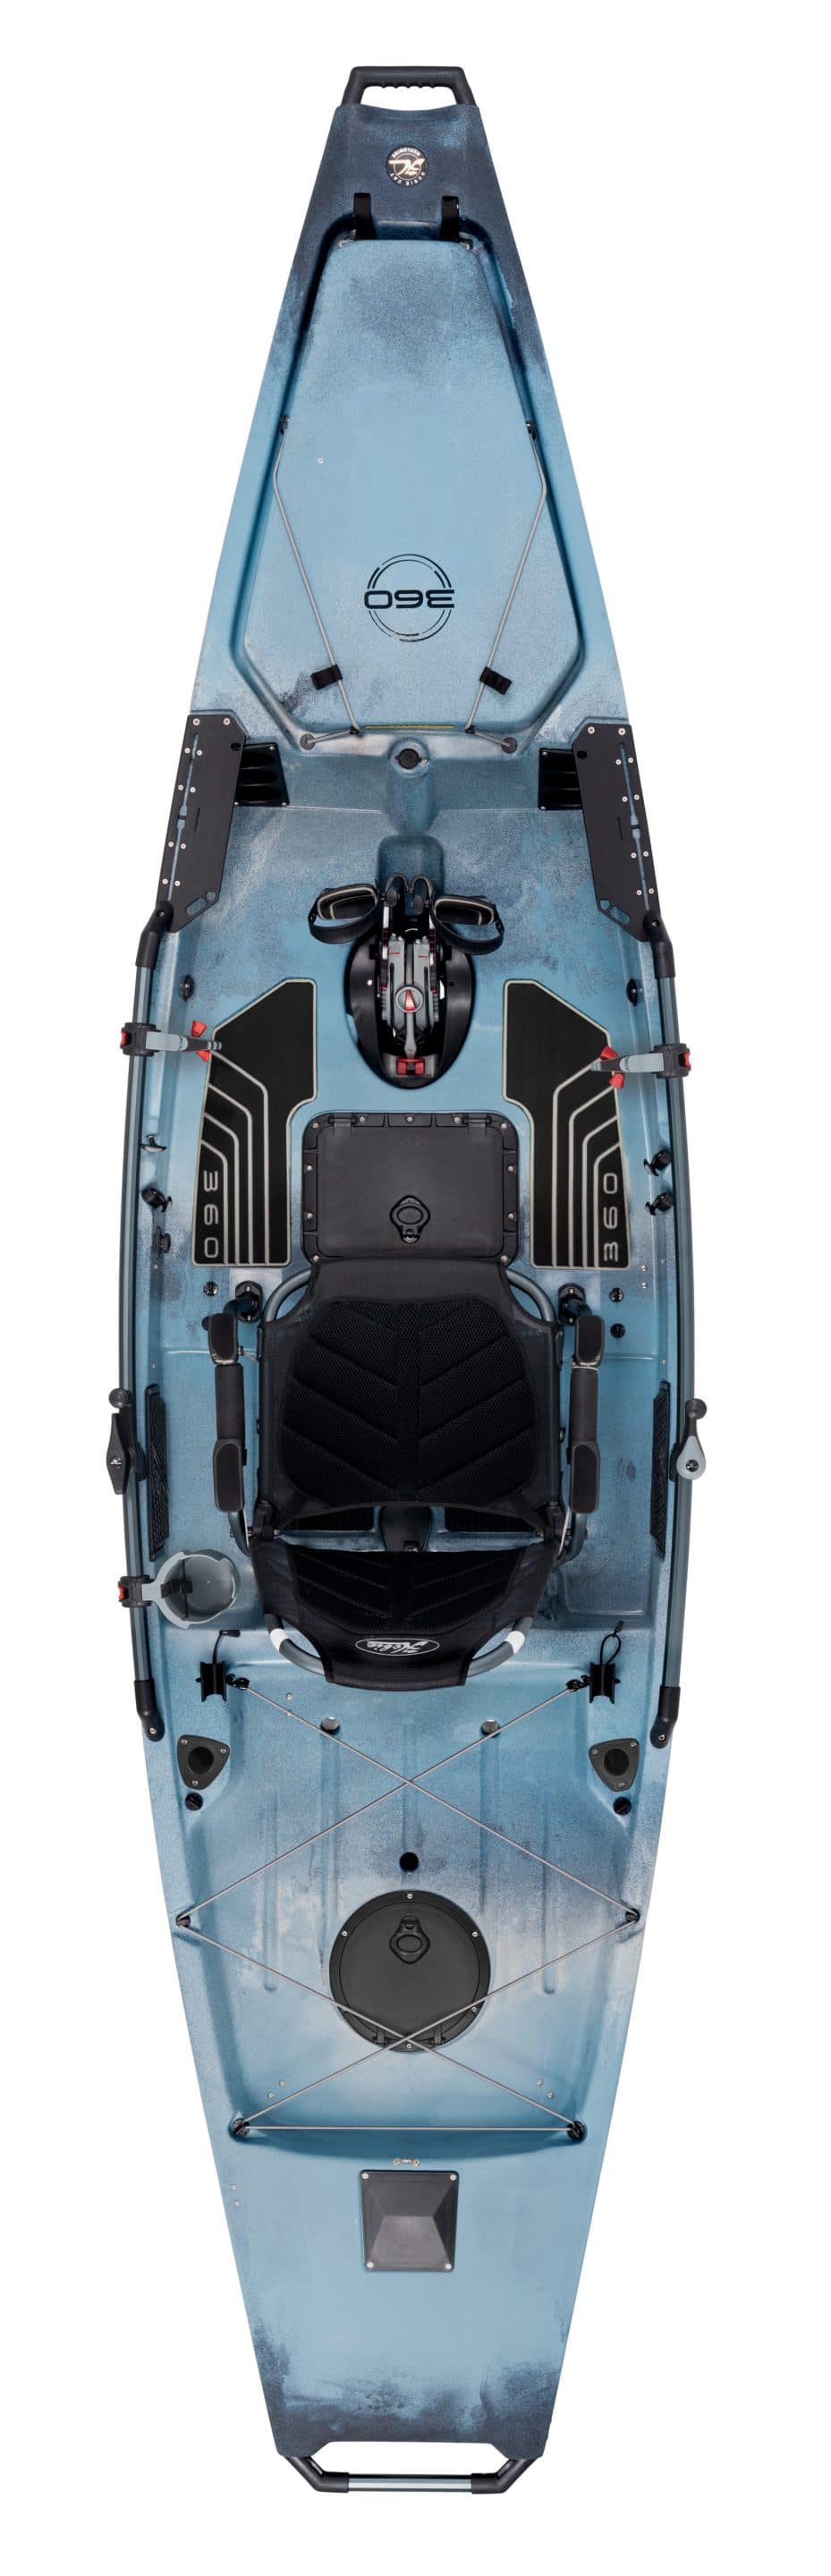 Top down view of the Pro Angler with 360 pedal drive in artic camo